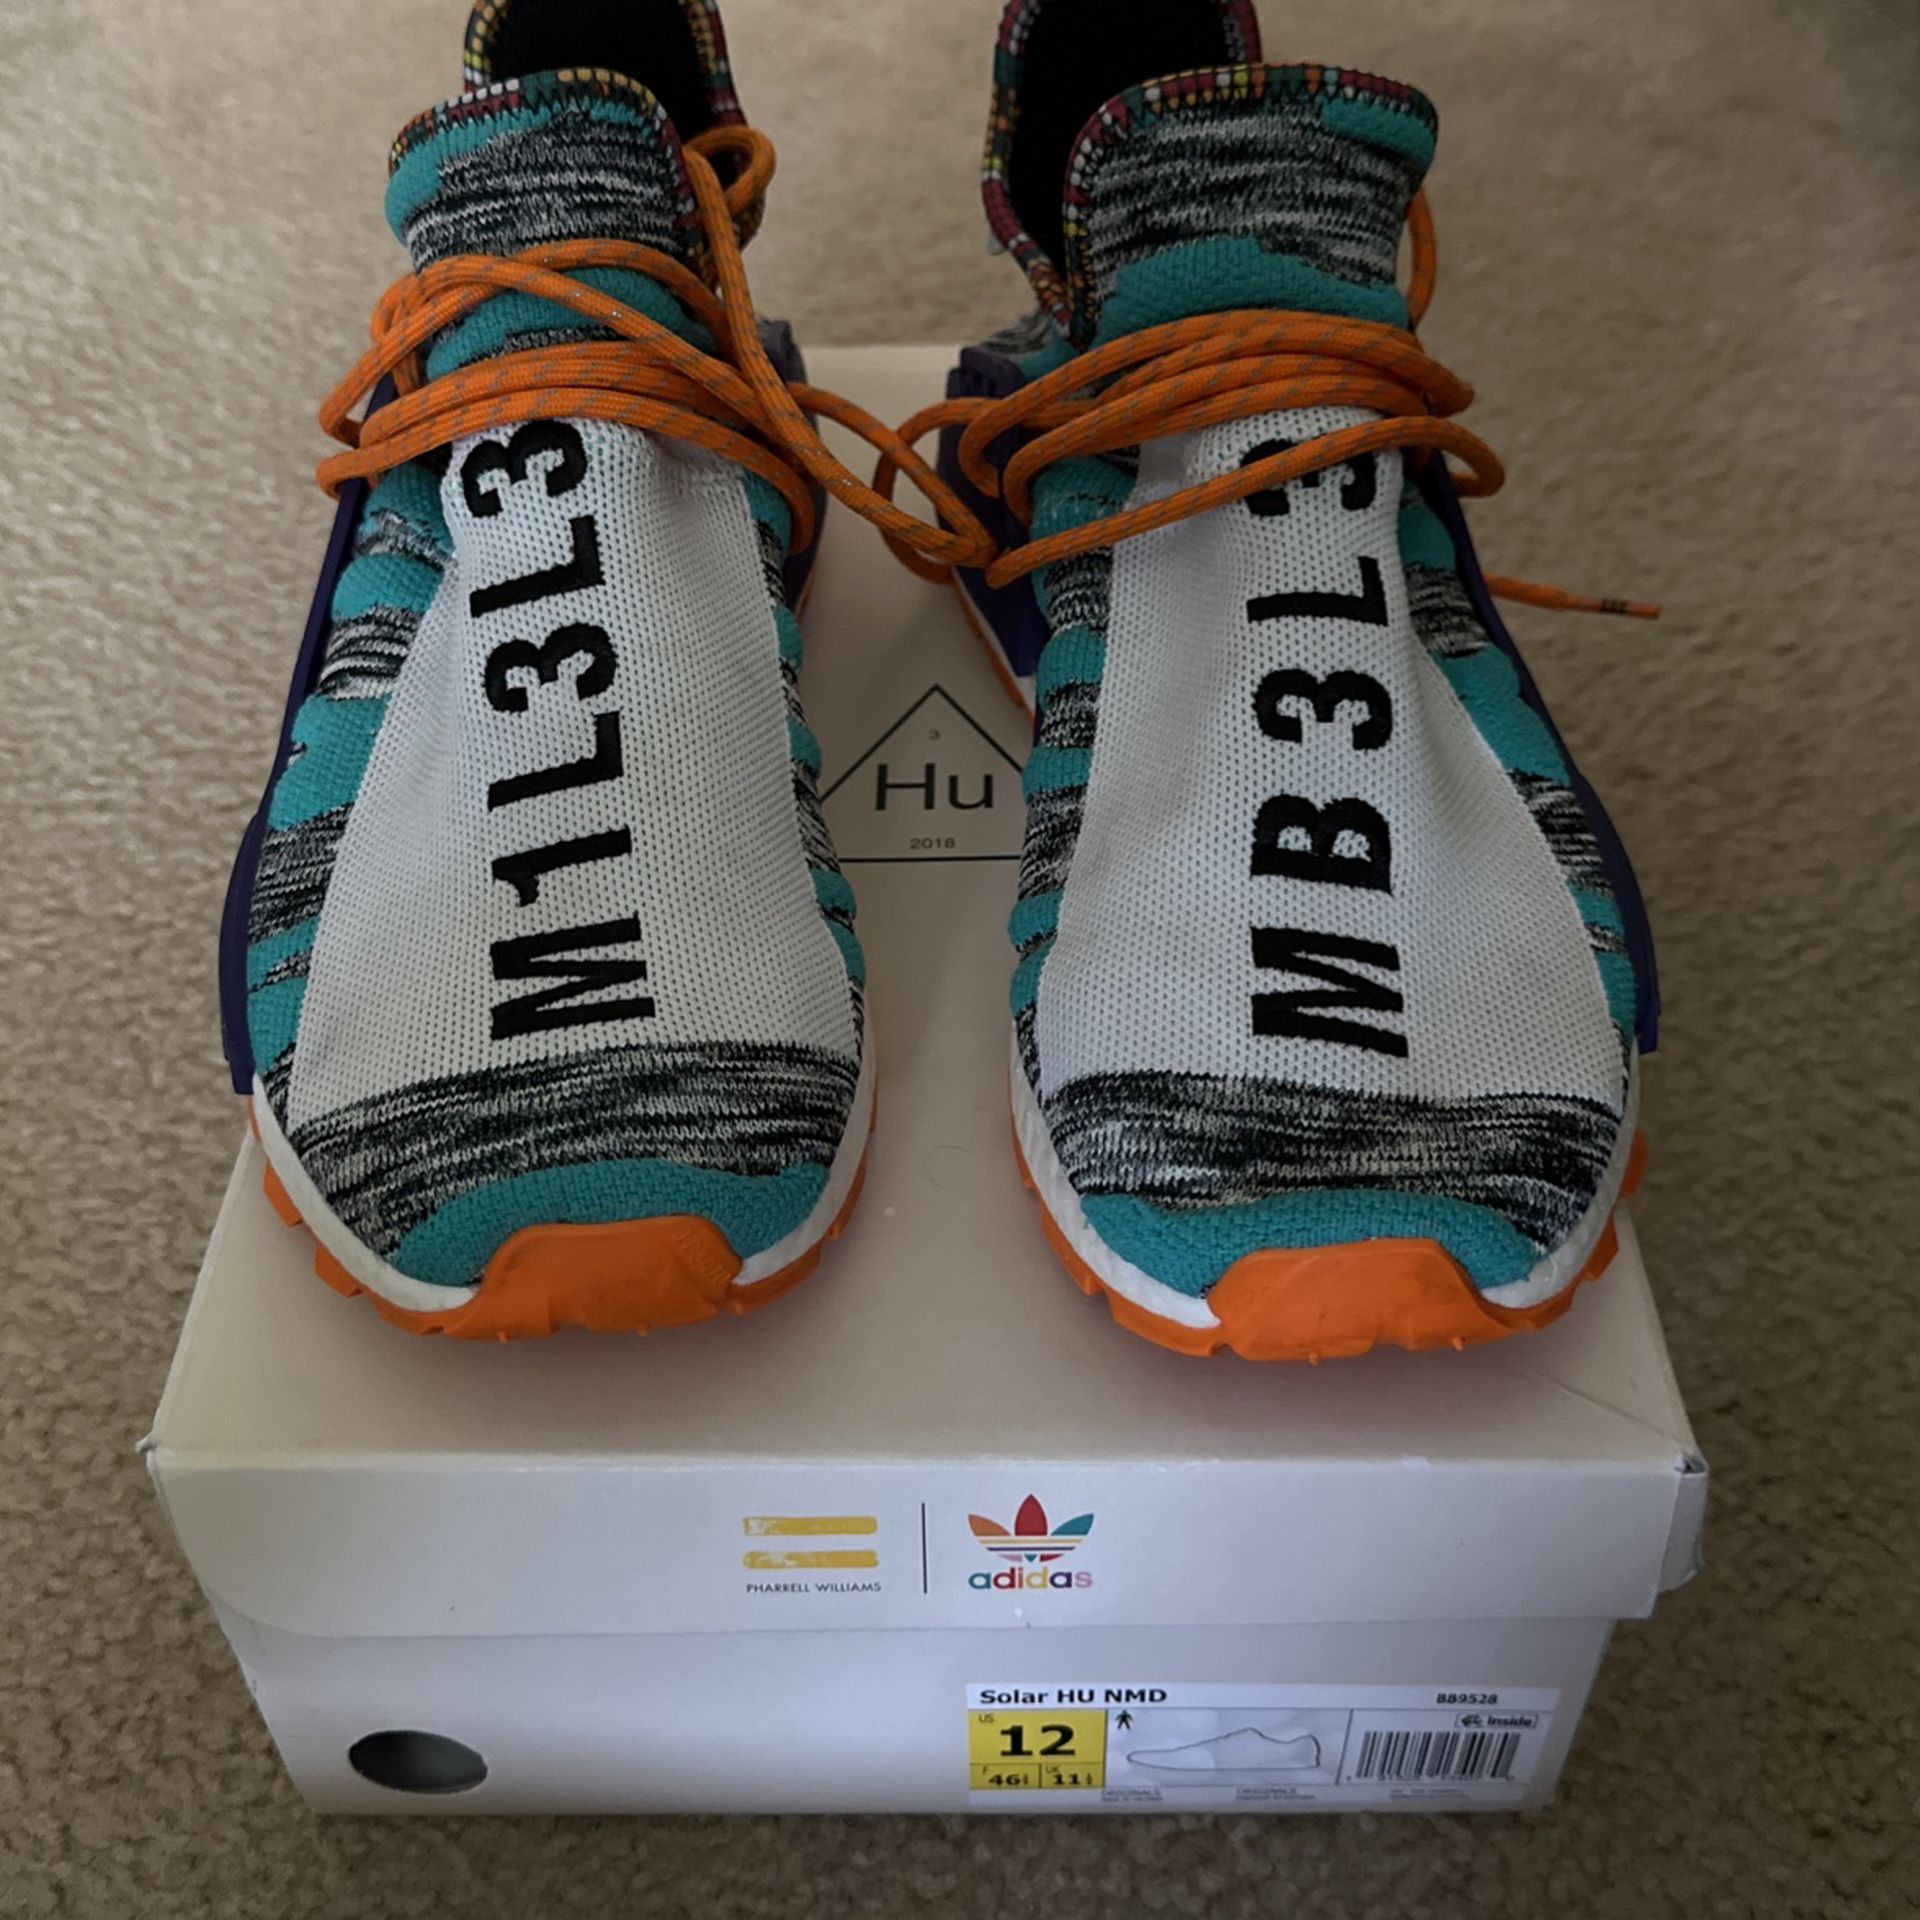 Adidas race Solar for Sale in Parrish, FL - OfferUp